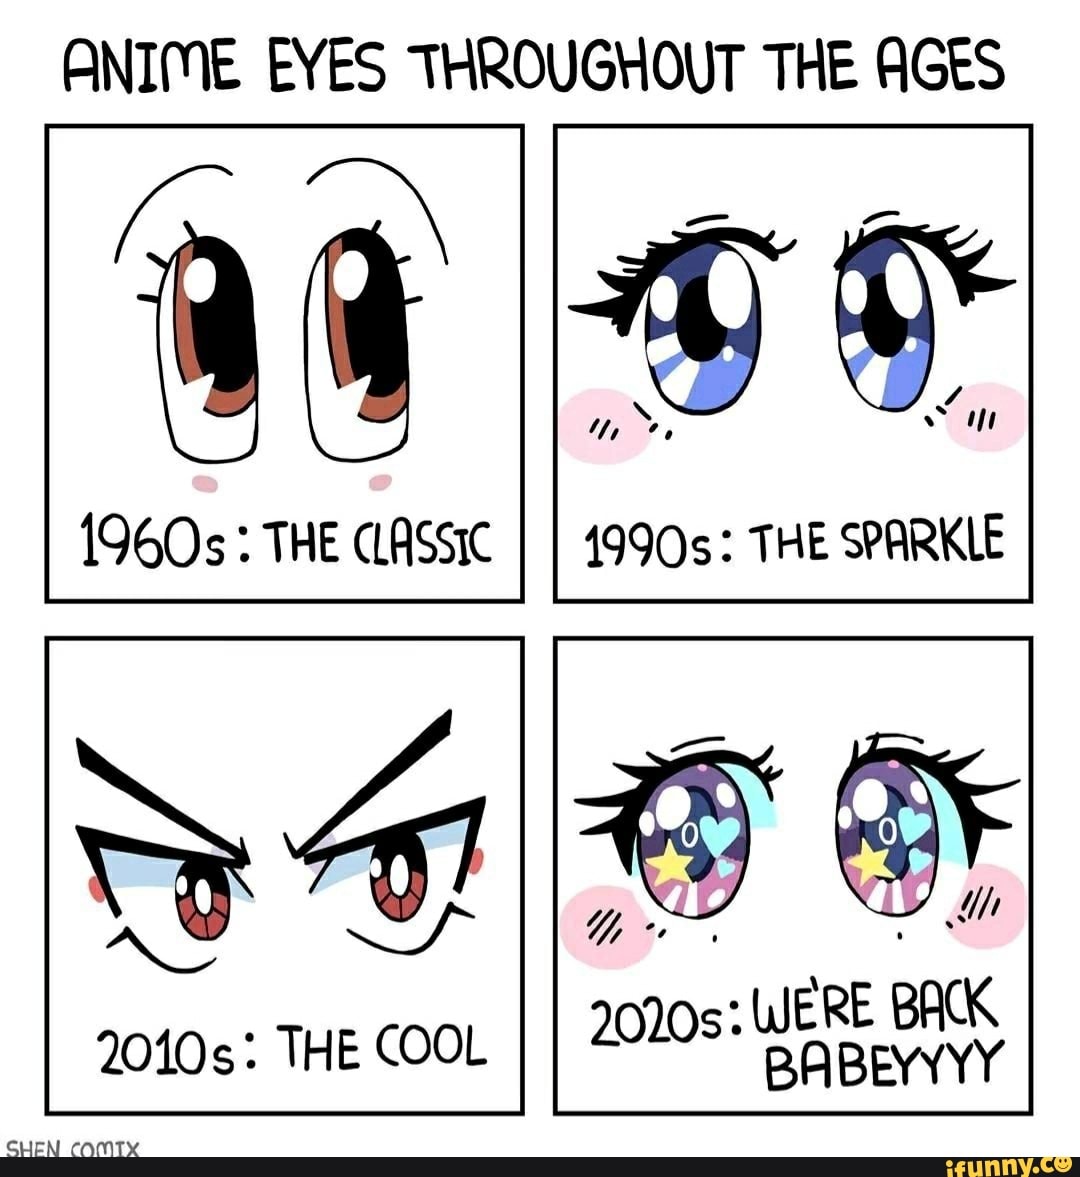 ANIME EYES THROUGHOUT THE AGES aa oe 1960s: THE CLASSIC I I 1990s: THE  SPARKLE WERE BACK 2010s: THE COOL 2010s: WERE QUEEN CcomtTx 